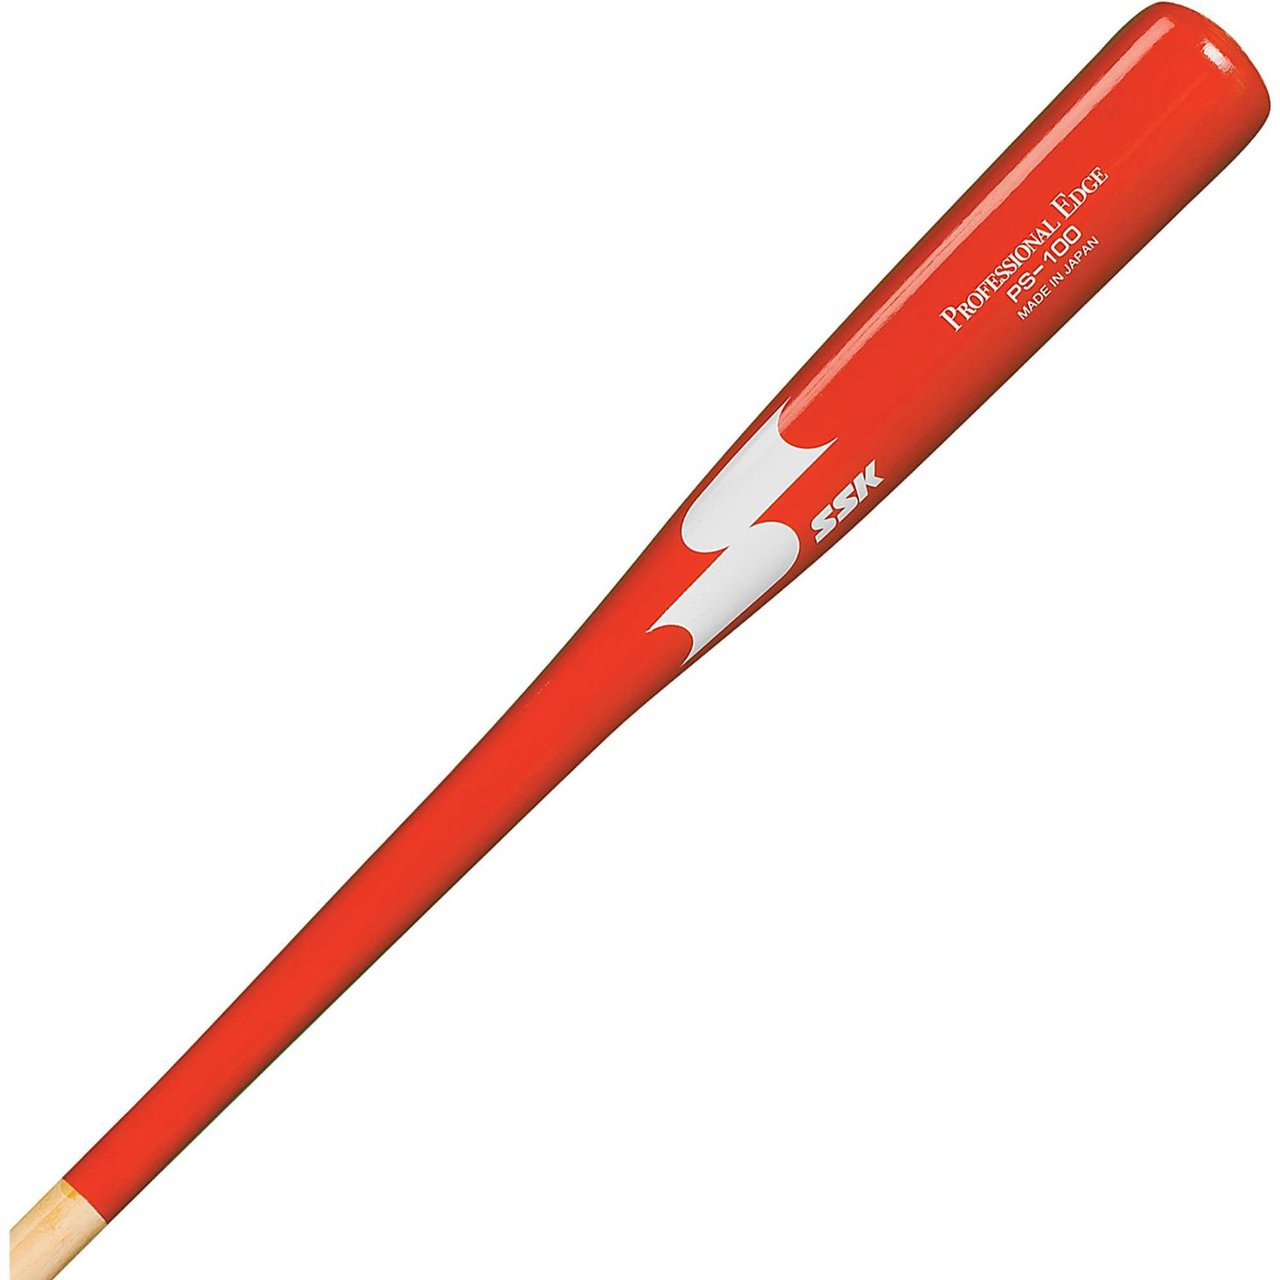 SSK 33 Wood Fungo Bat The most sought after wood Fungo on the Market! SSKs Wood Fungo bats are the #1 choice of most coaches at all levels. Made of Japanese White Ash, these 33 bats are precision balanced and lightweight for maximum length of use.